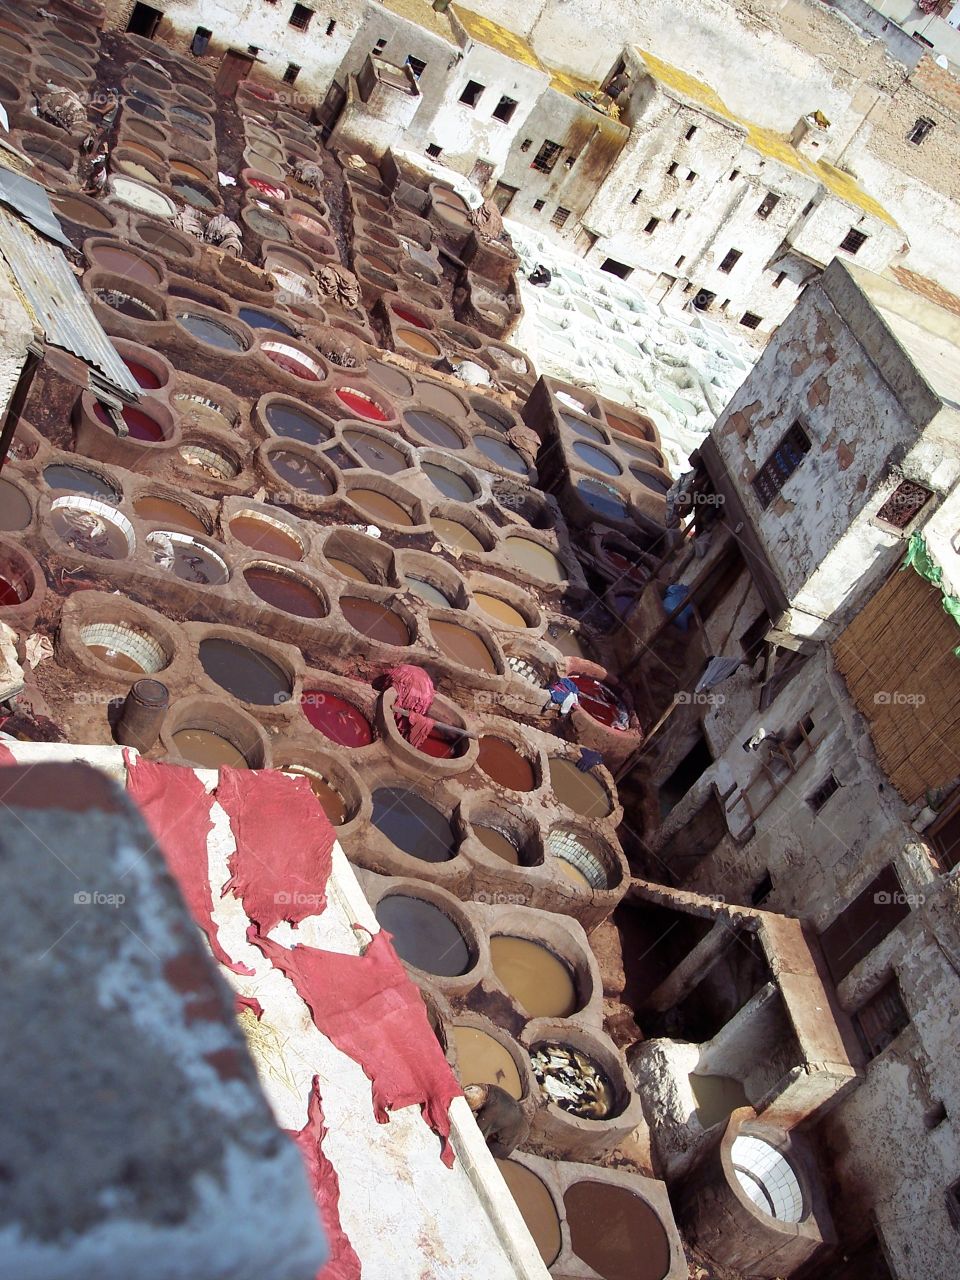  Morocco travel : tannery 